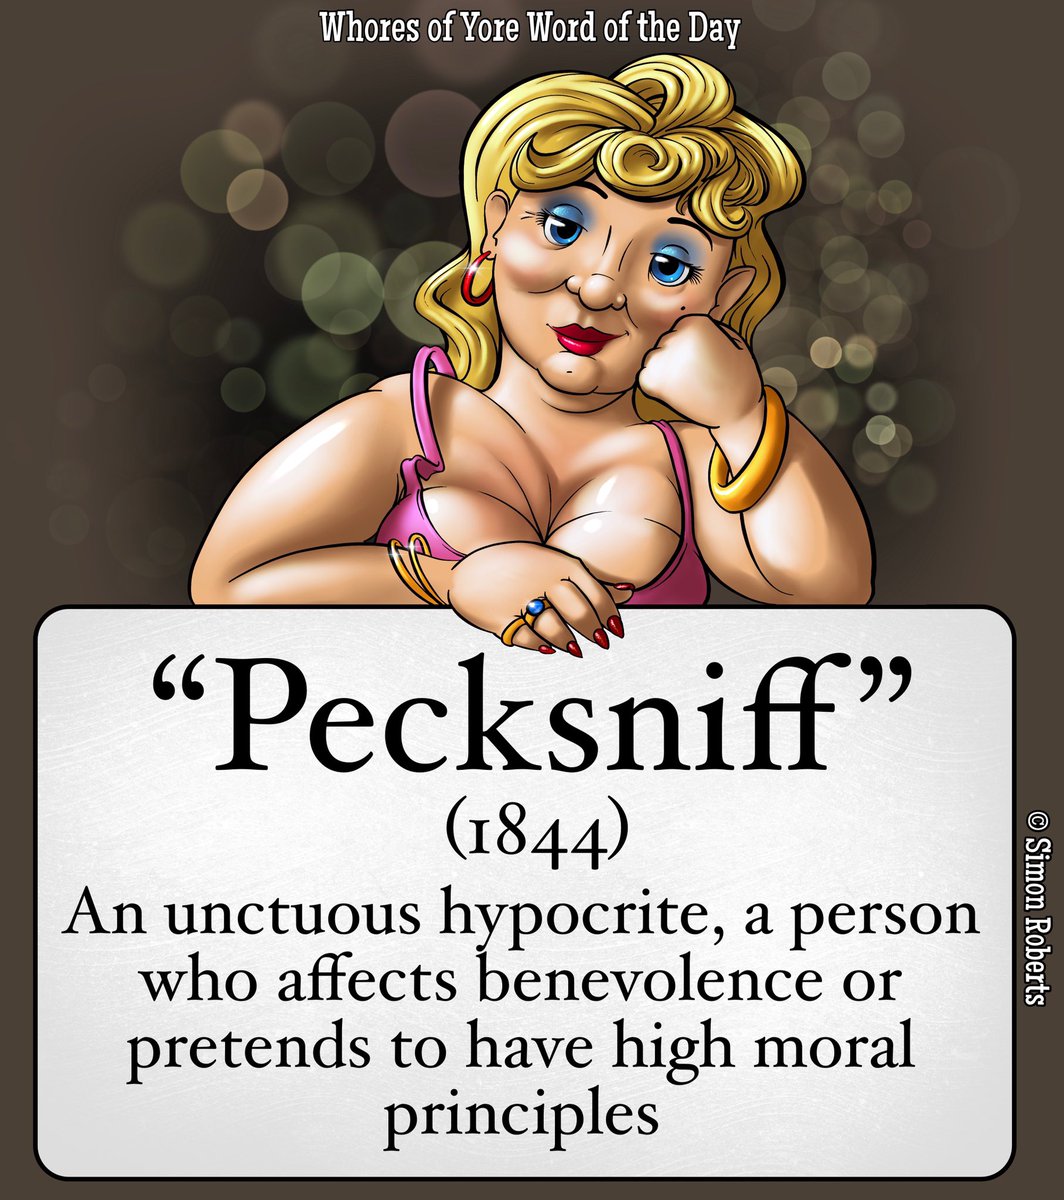 Word of the Day: “Pecksniff”